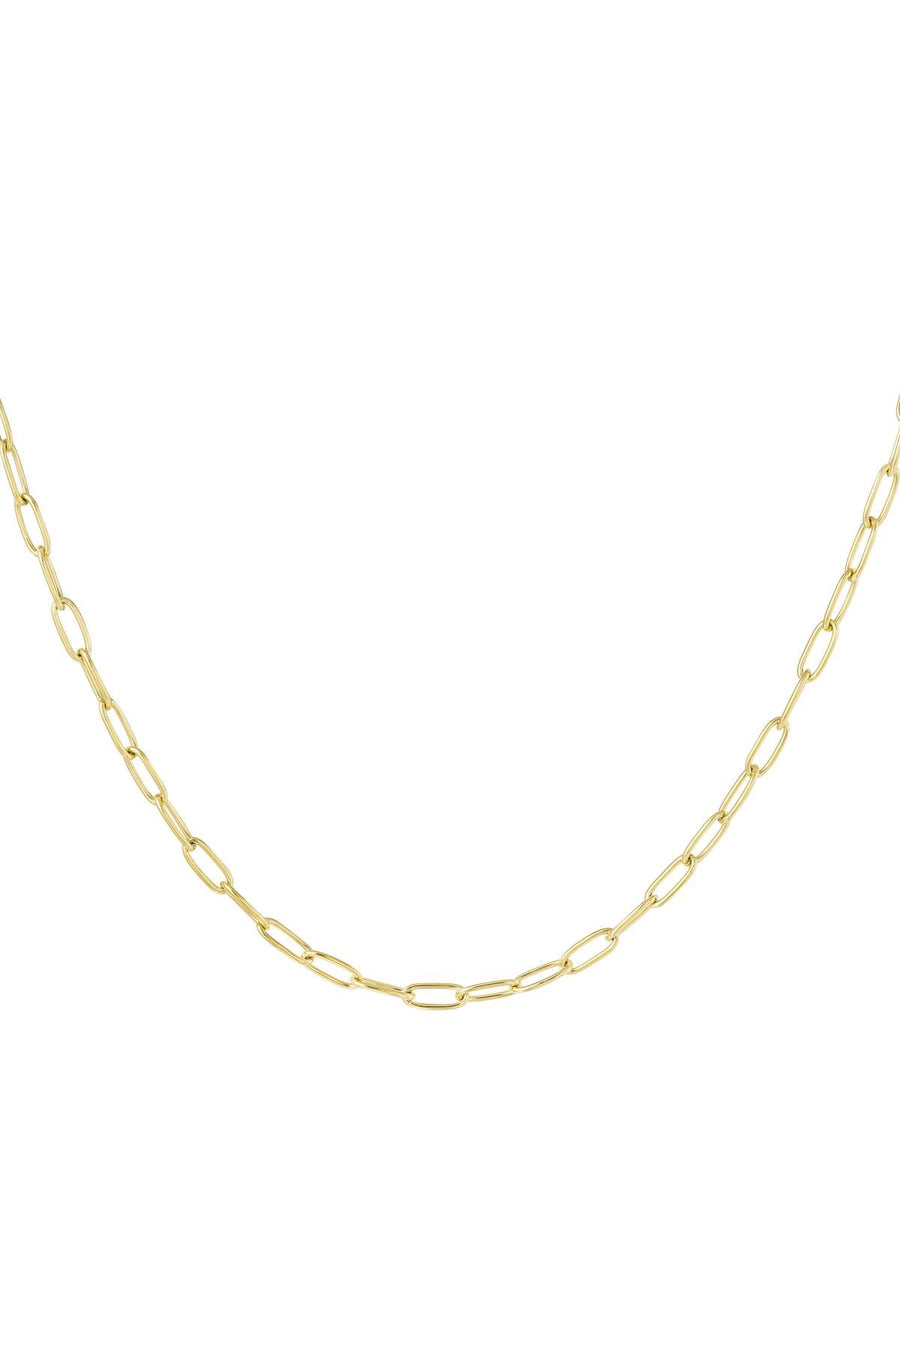 Basic Gold Link Chain Necklace